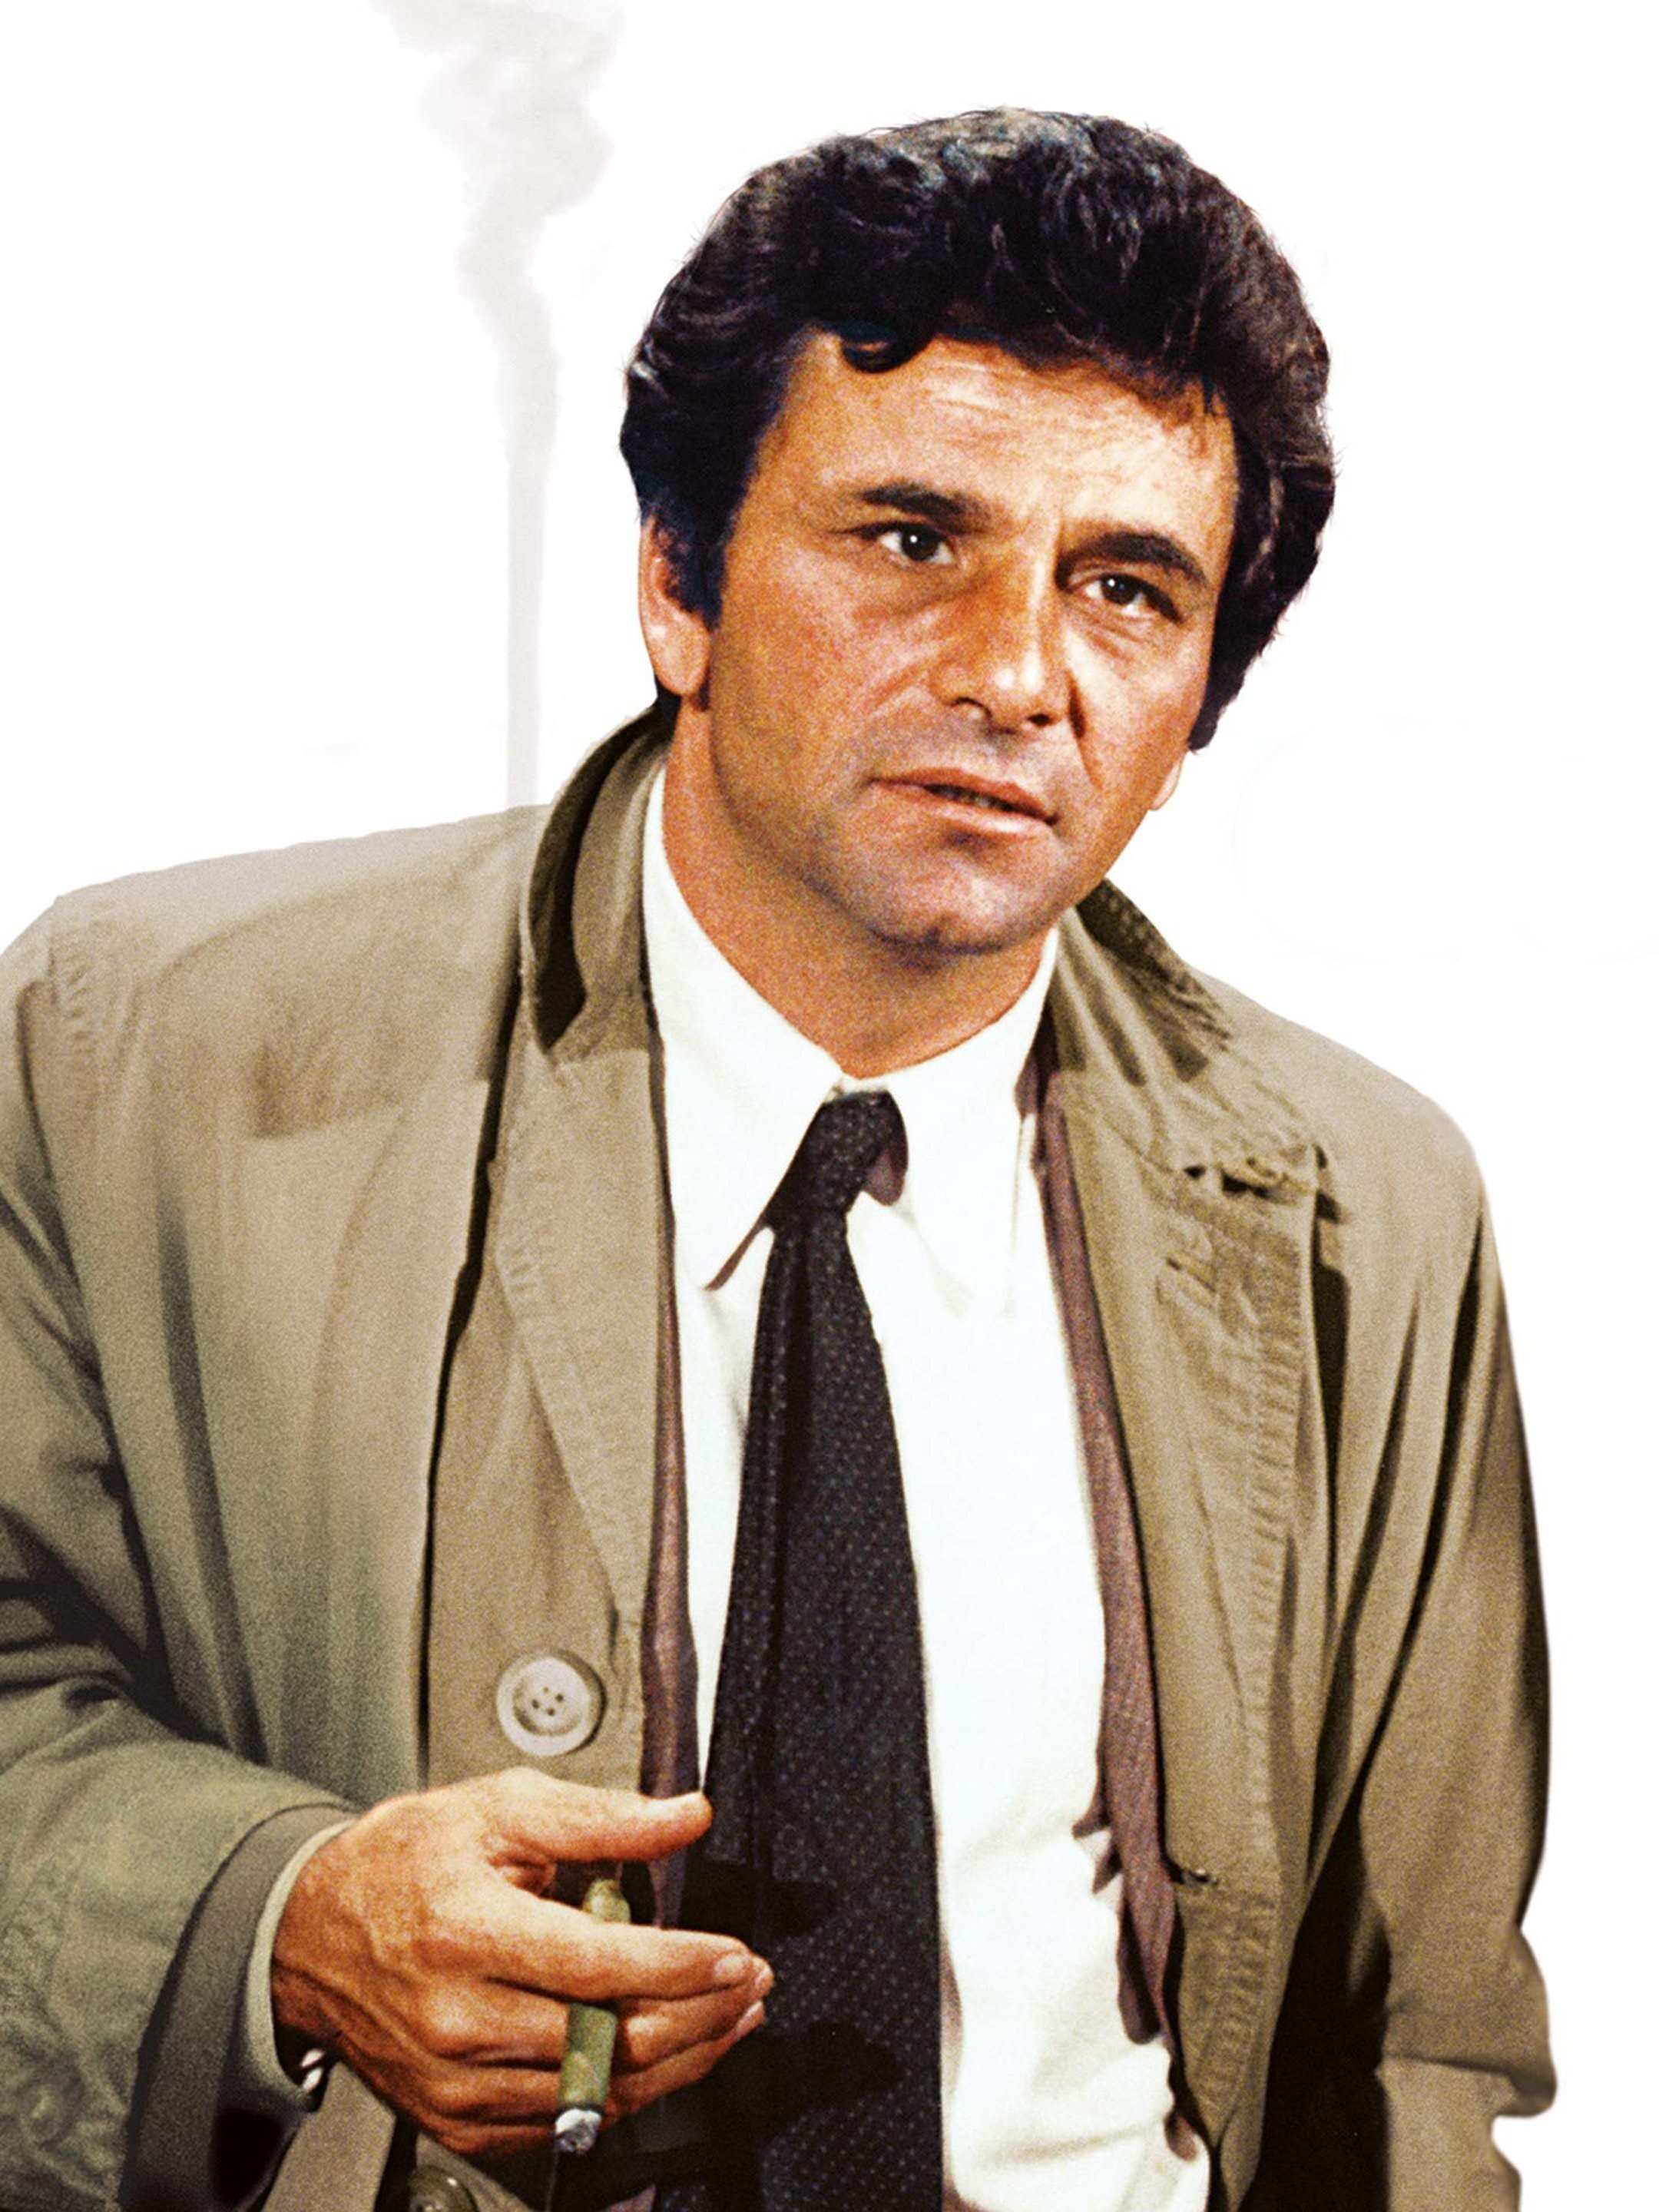 Two friends facing off resulted in the greatest Columbo episode